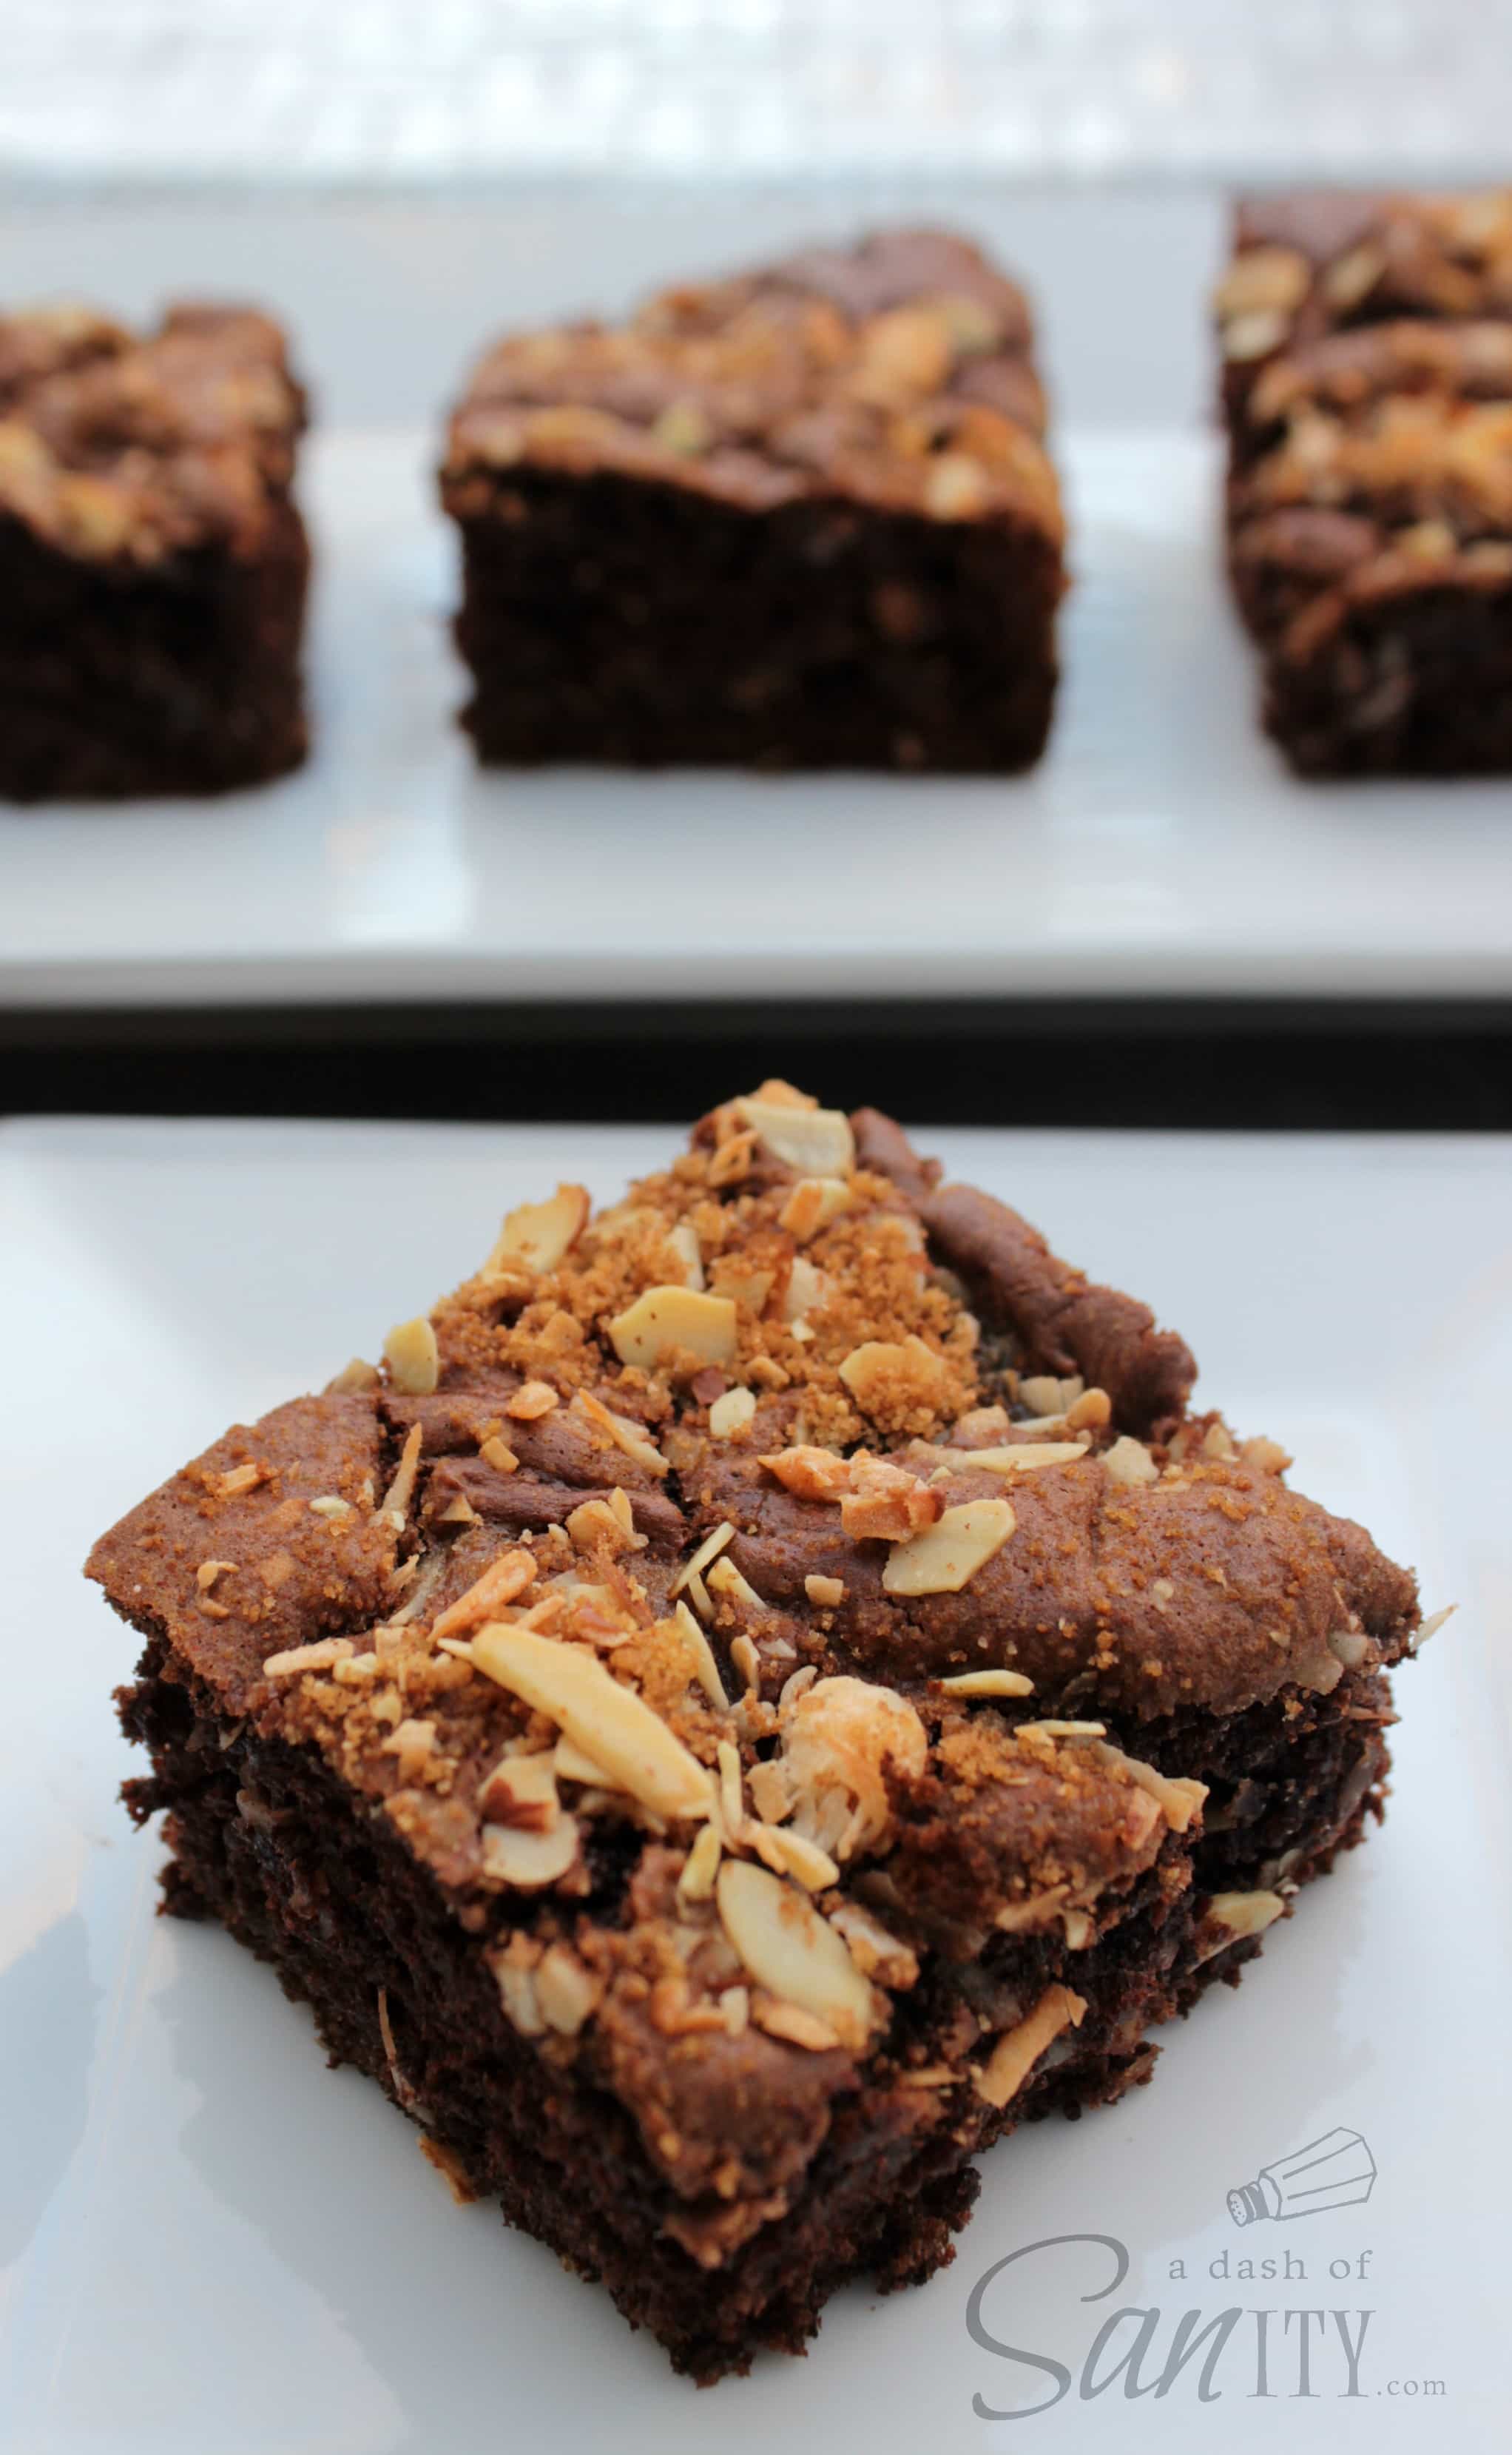 Chocolate Coconut Almond Coffee Cake square served on a plate, with 3 squares on serving tray in background